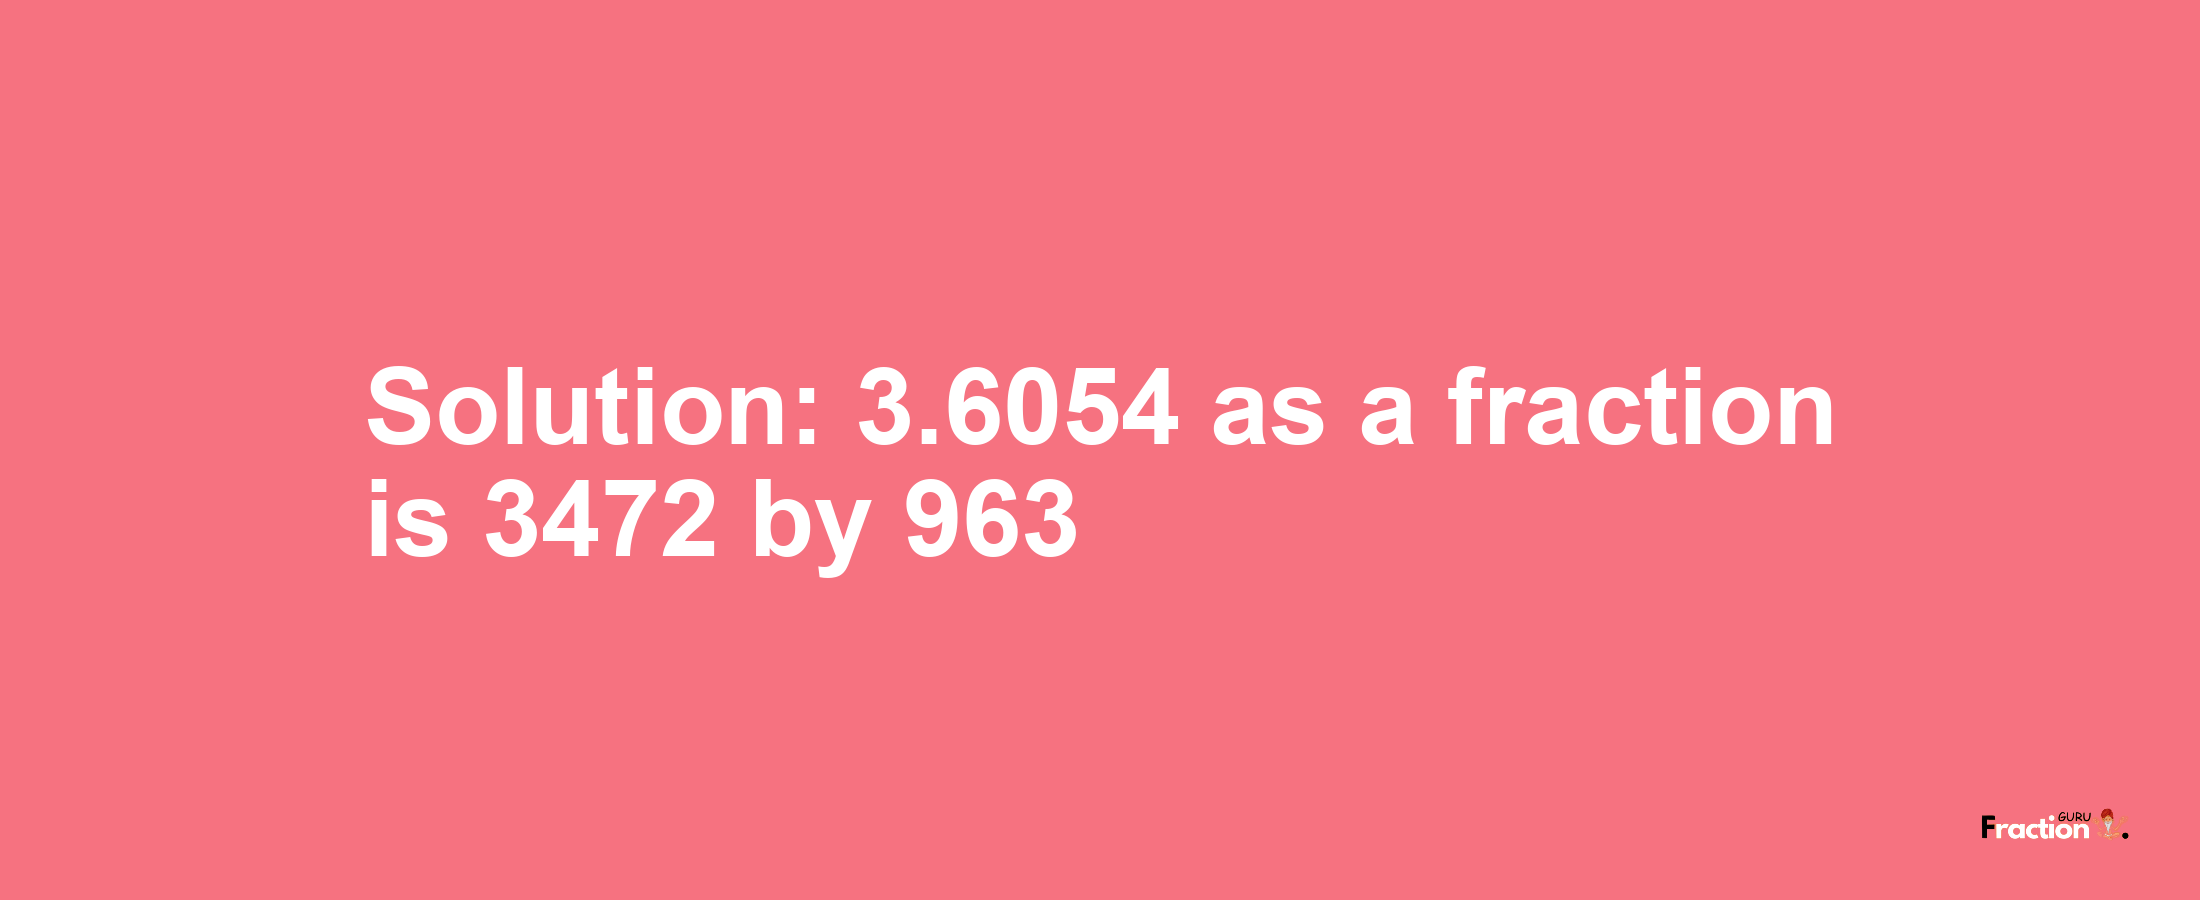 Solution:3.6054 as a fraction is 3472/963